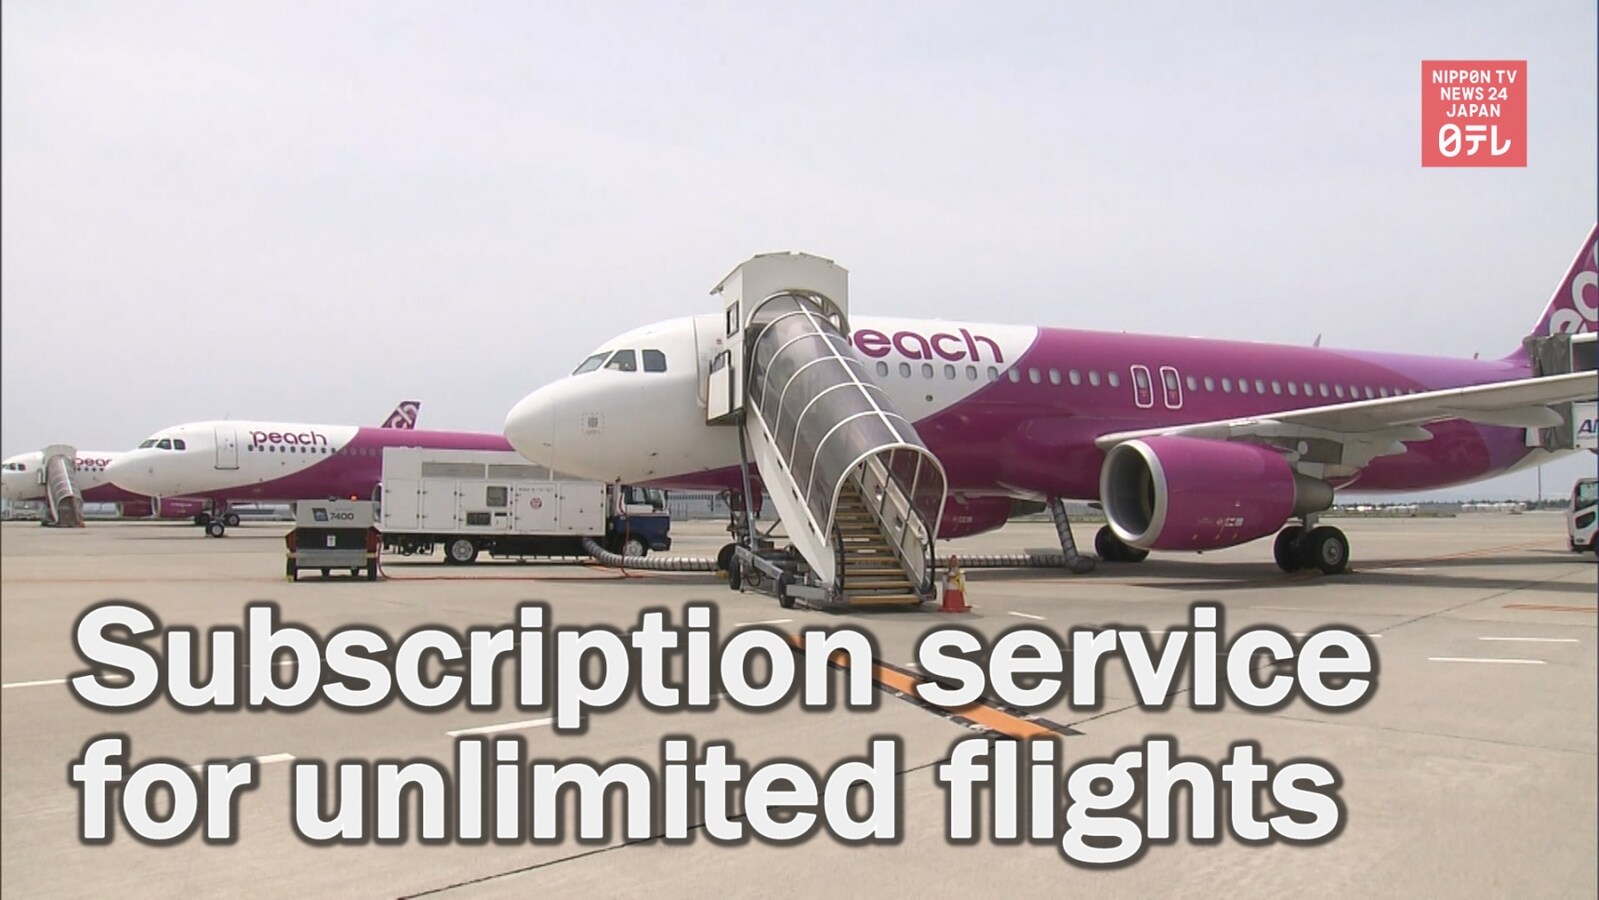 Subscription Service for Unlimited Flights All About Japan